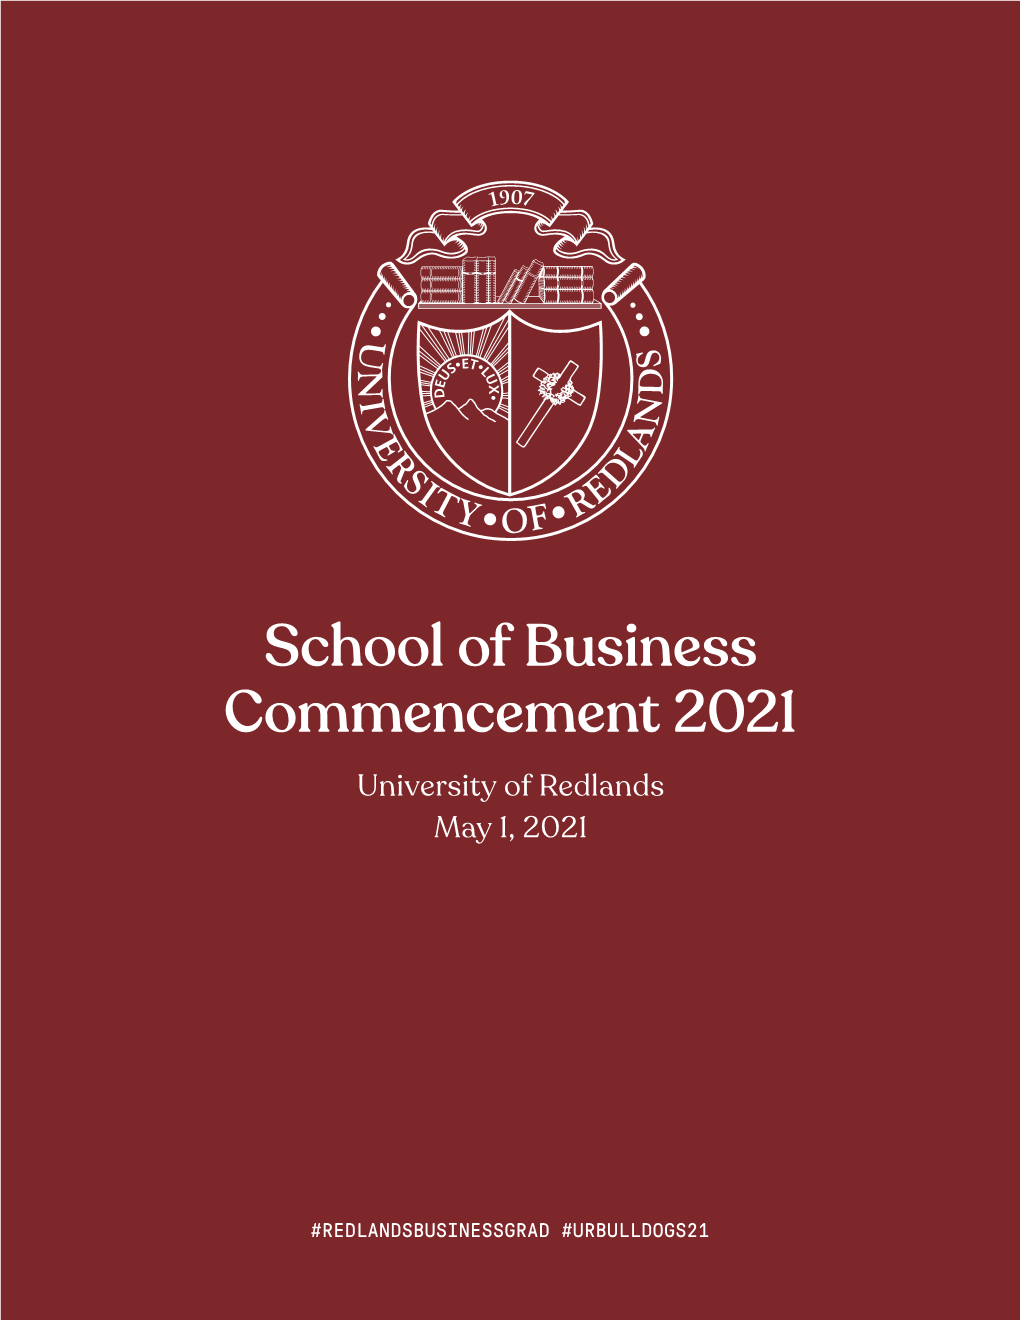 School of Business Commencement 2021 University of Redlands May 1, 2021